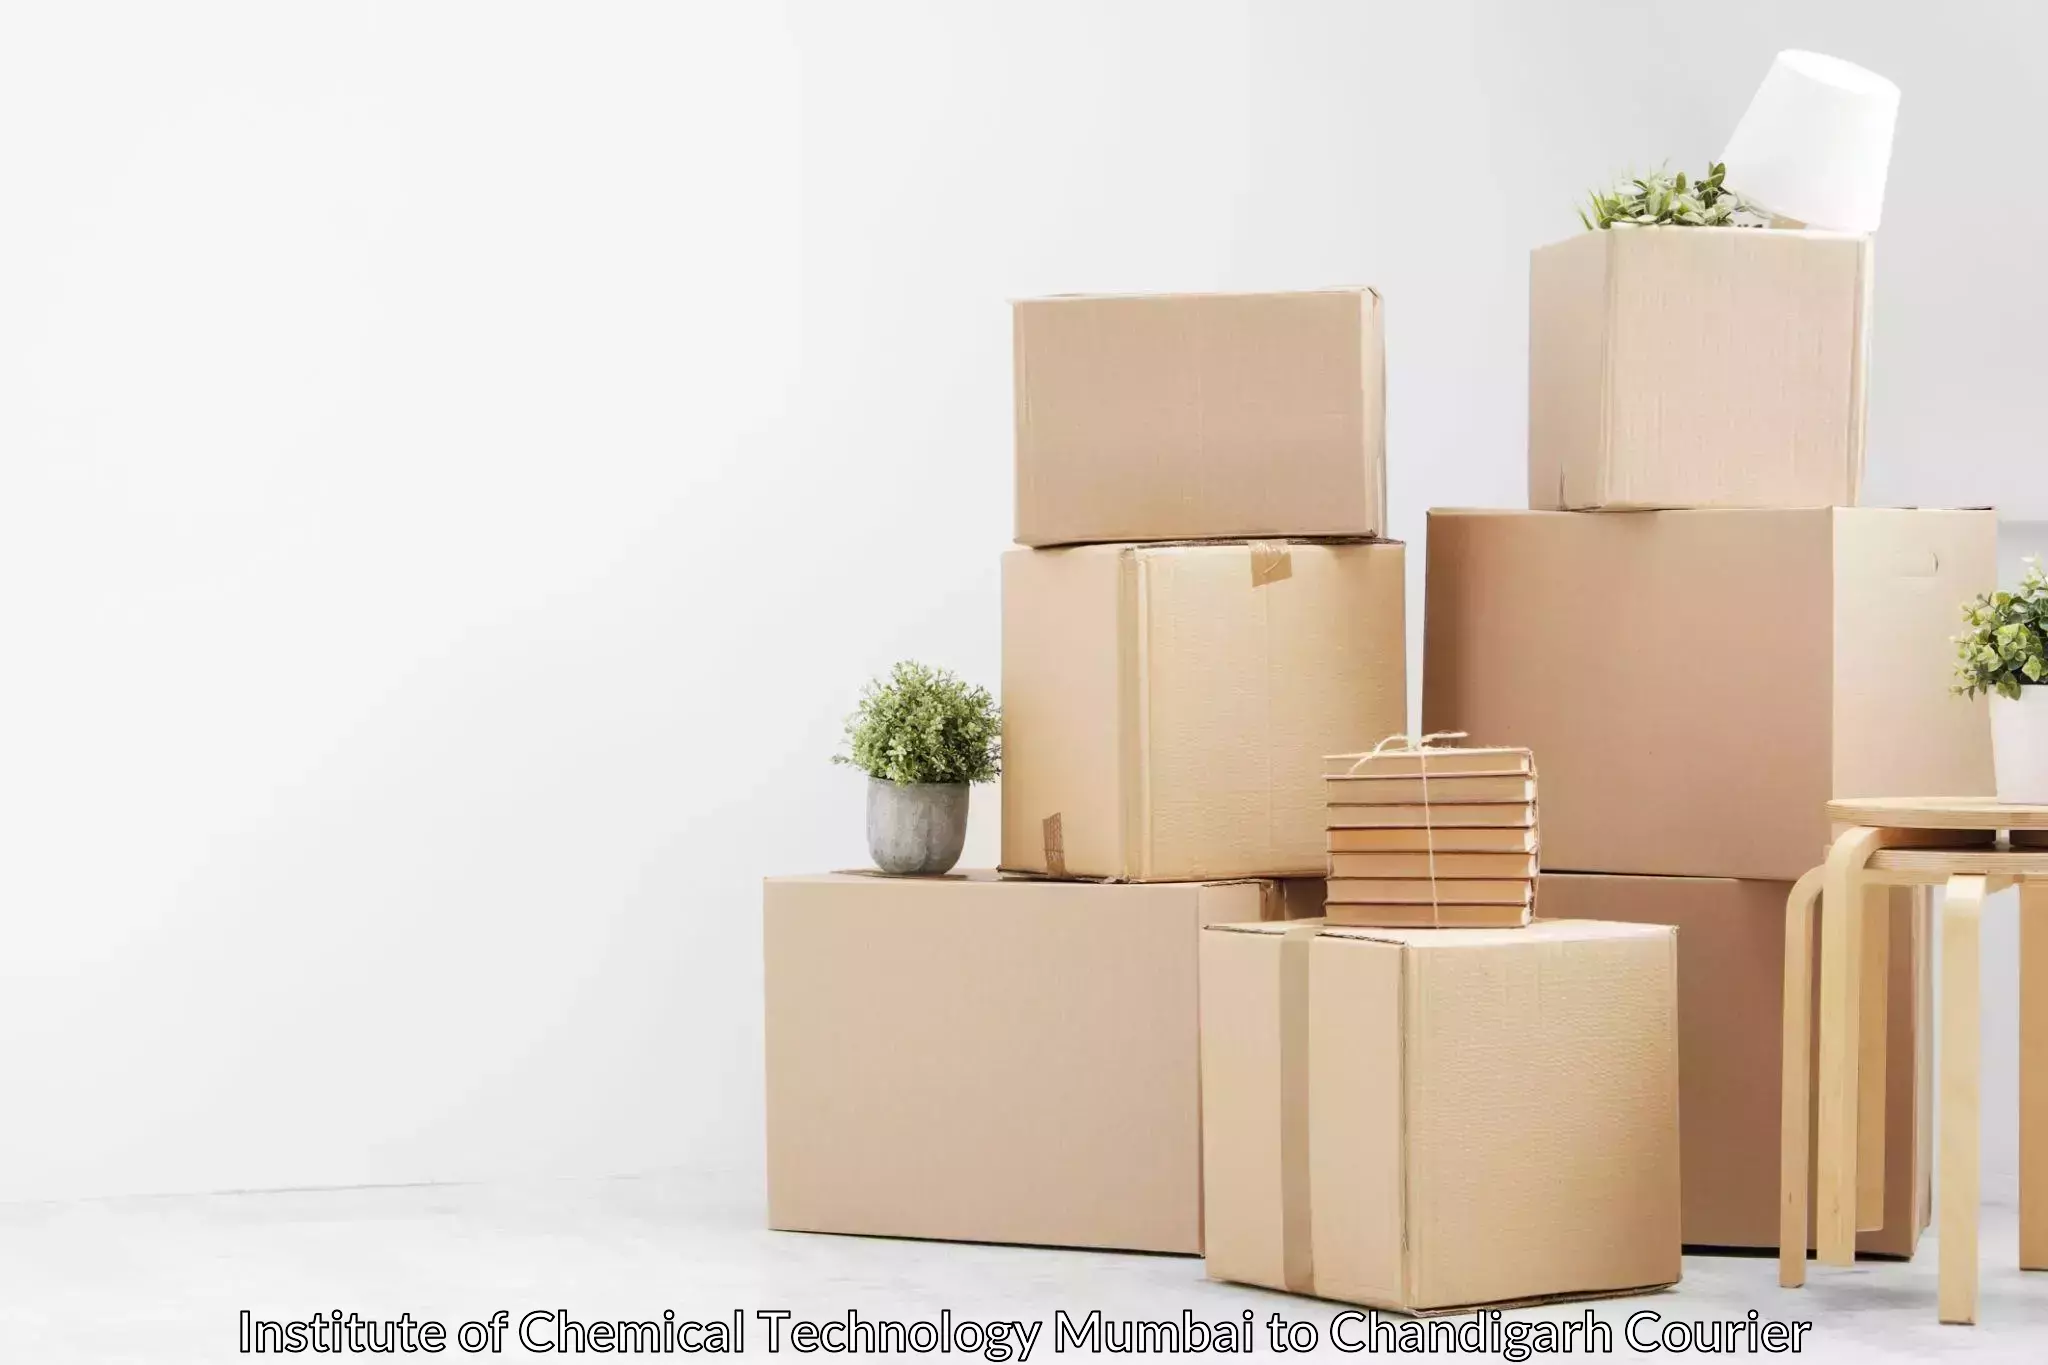 Furniture transport service Institute of Chemical Technology Mumbai to Chandigarh